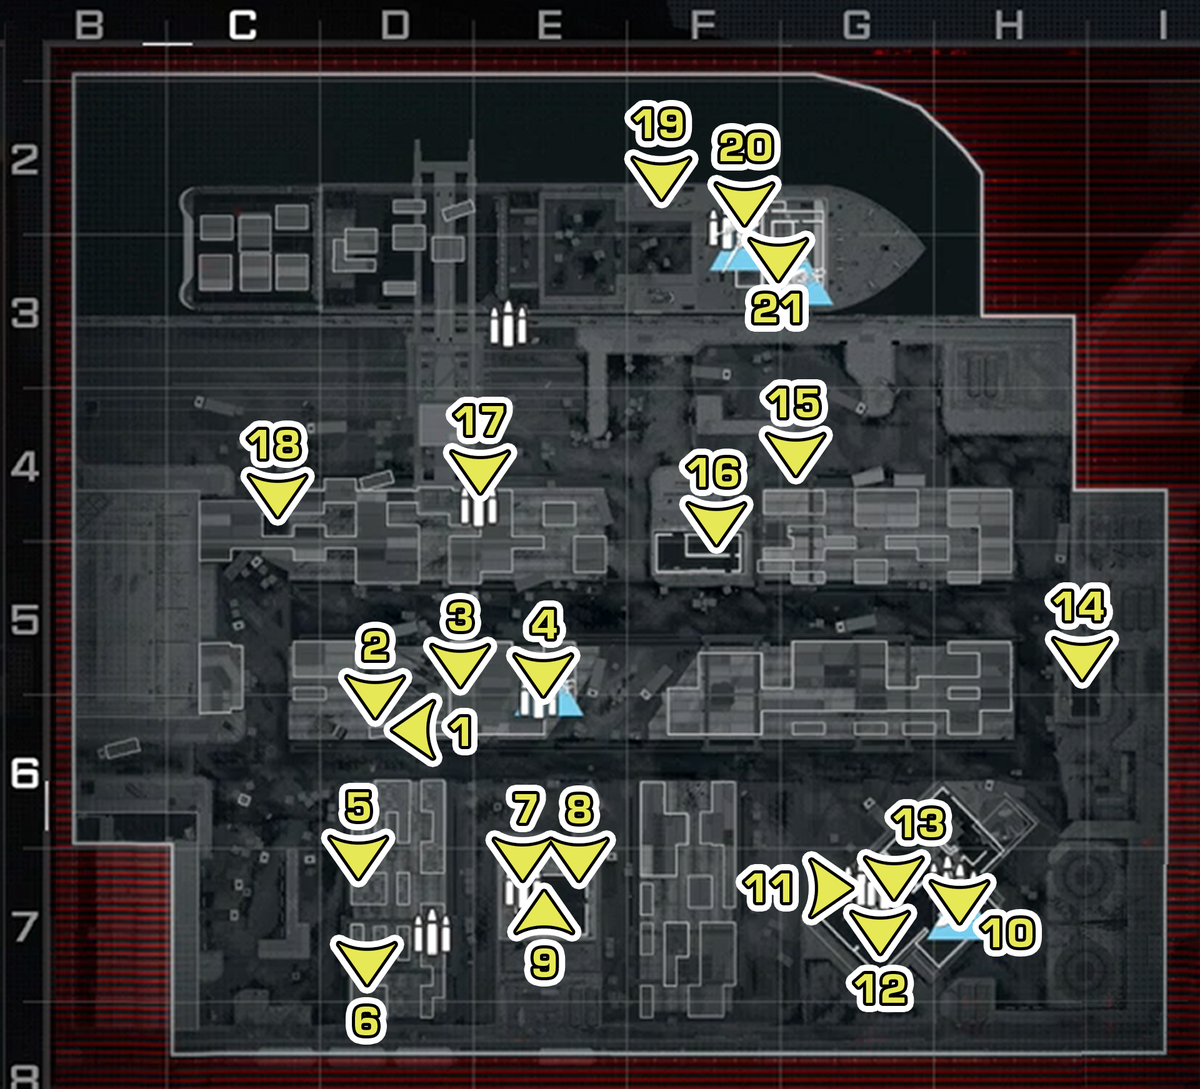 Call of Duty: Modern Warfare 3 Precious Cargo all weapons and items locations map